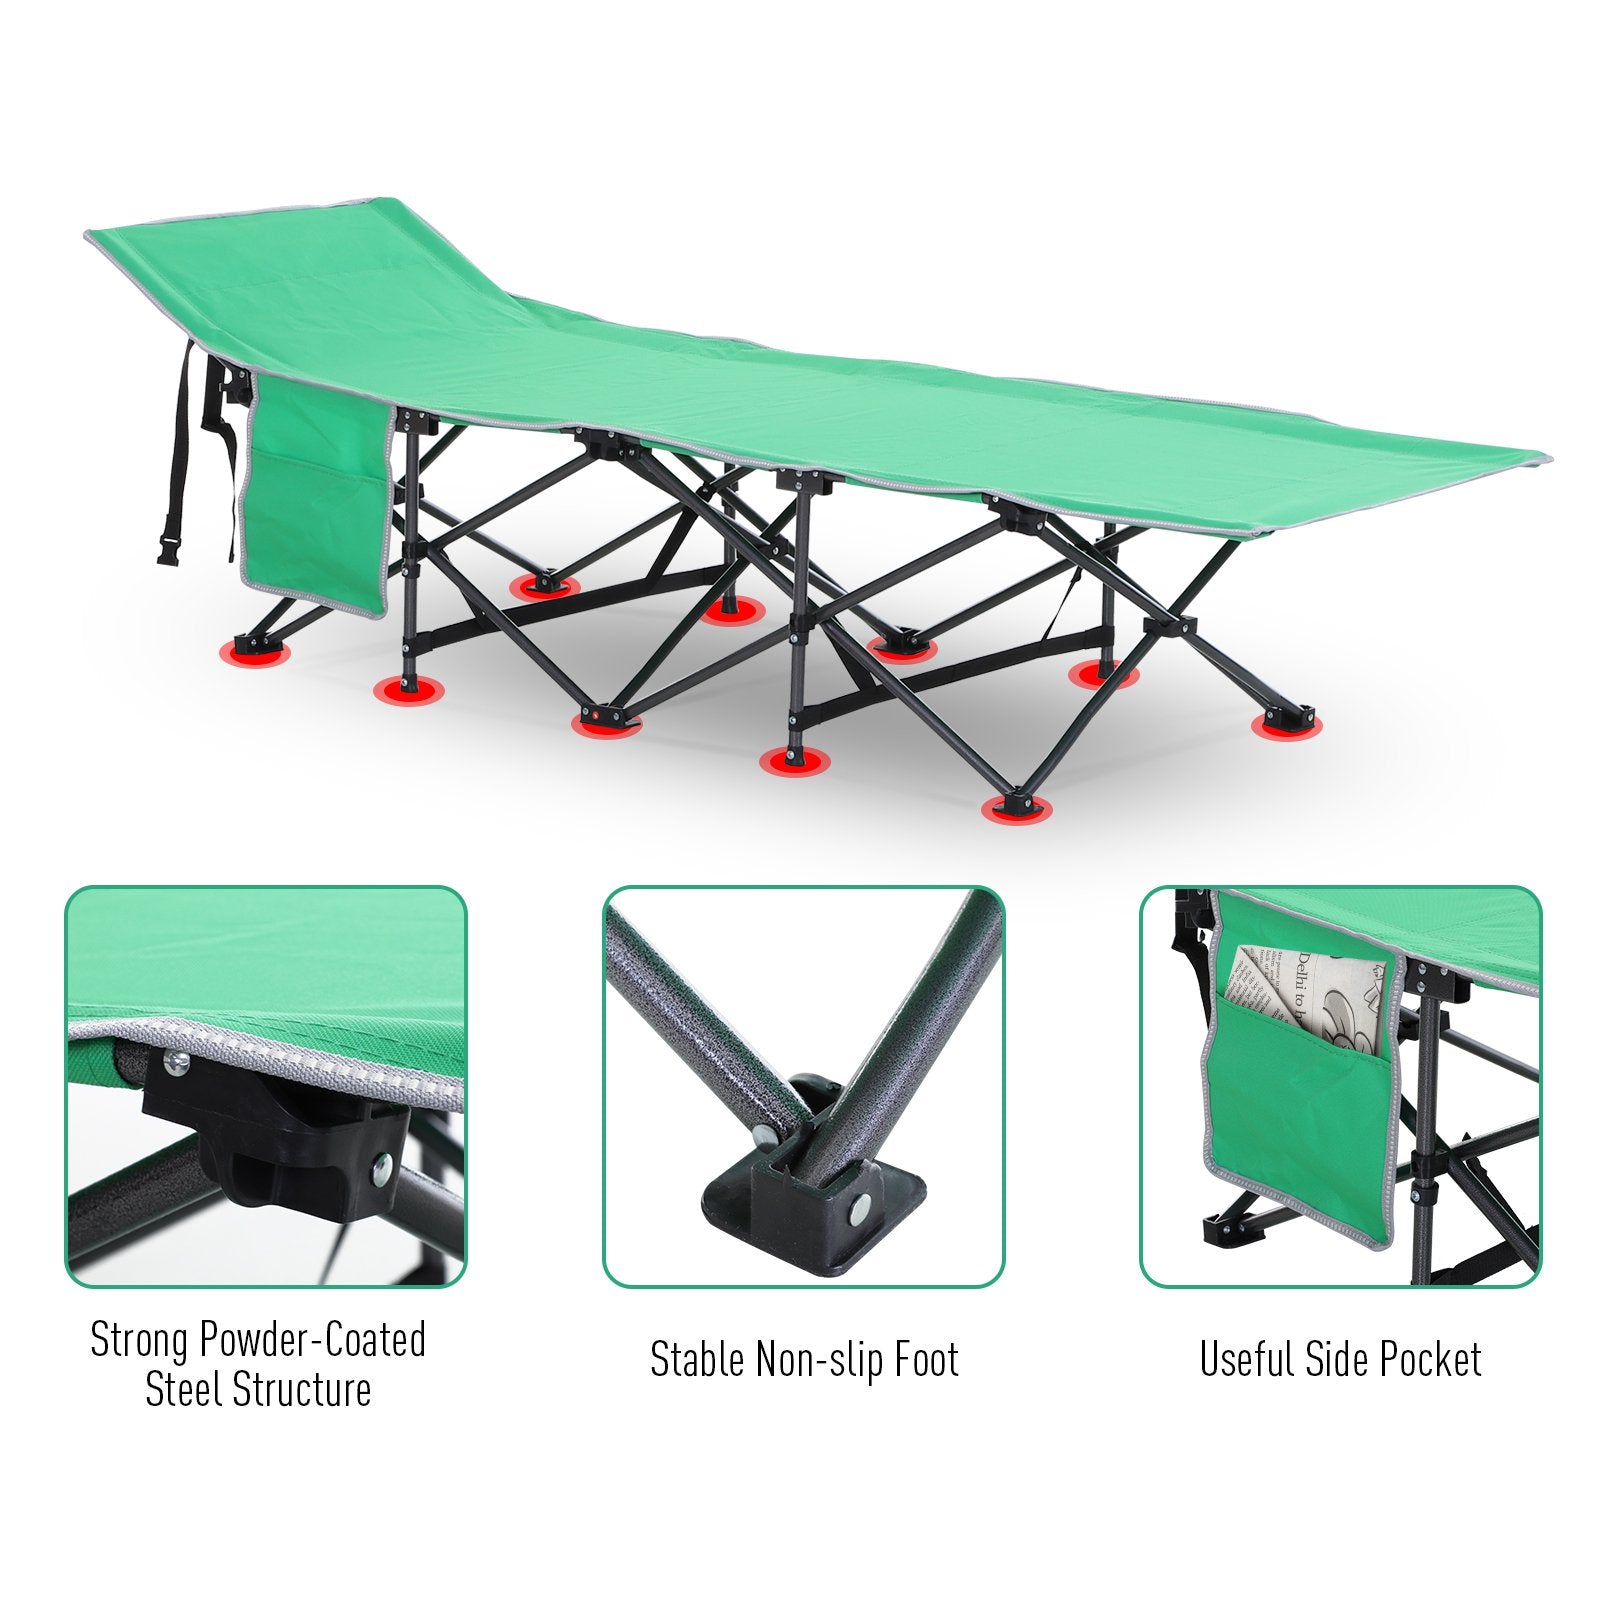 Folding Camping Cots for Adults with Carry Bags, Side Pockets, Outdoor Portable Sleeping Bed for Travel Camp Vocation, Green